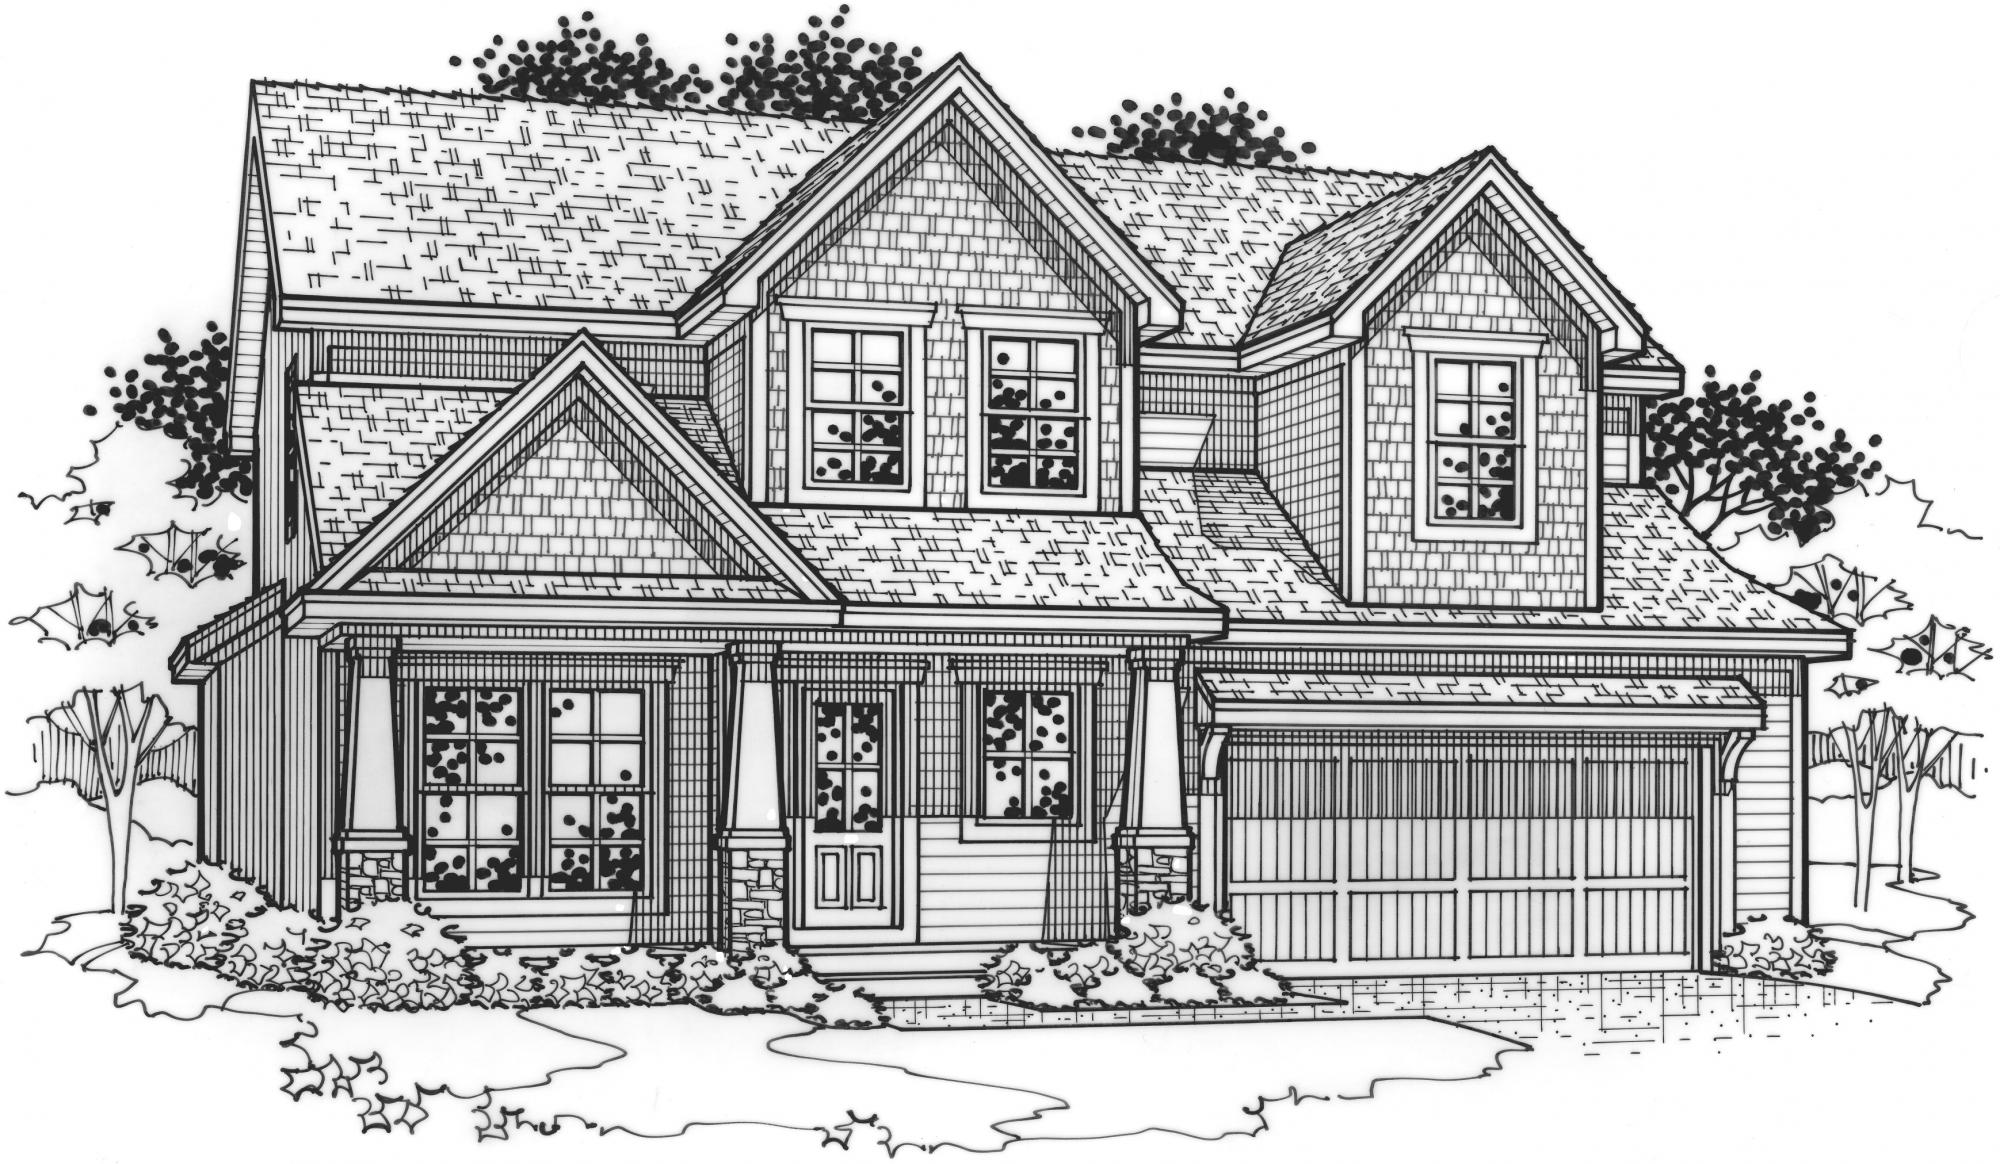 black and white rendering of a sequoia model from Lambie custom homes